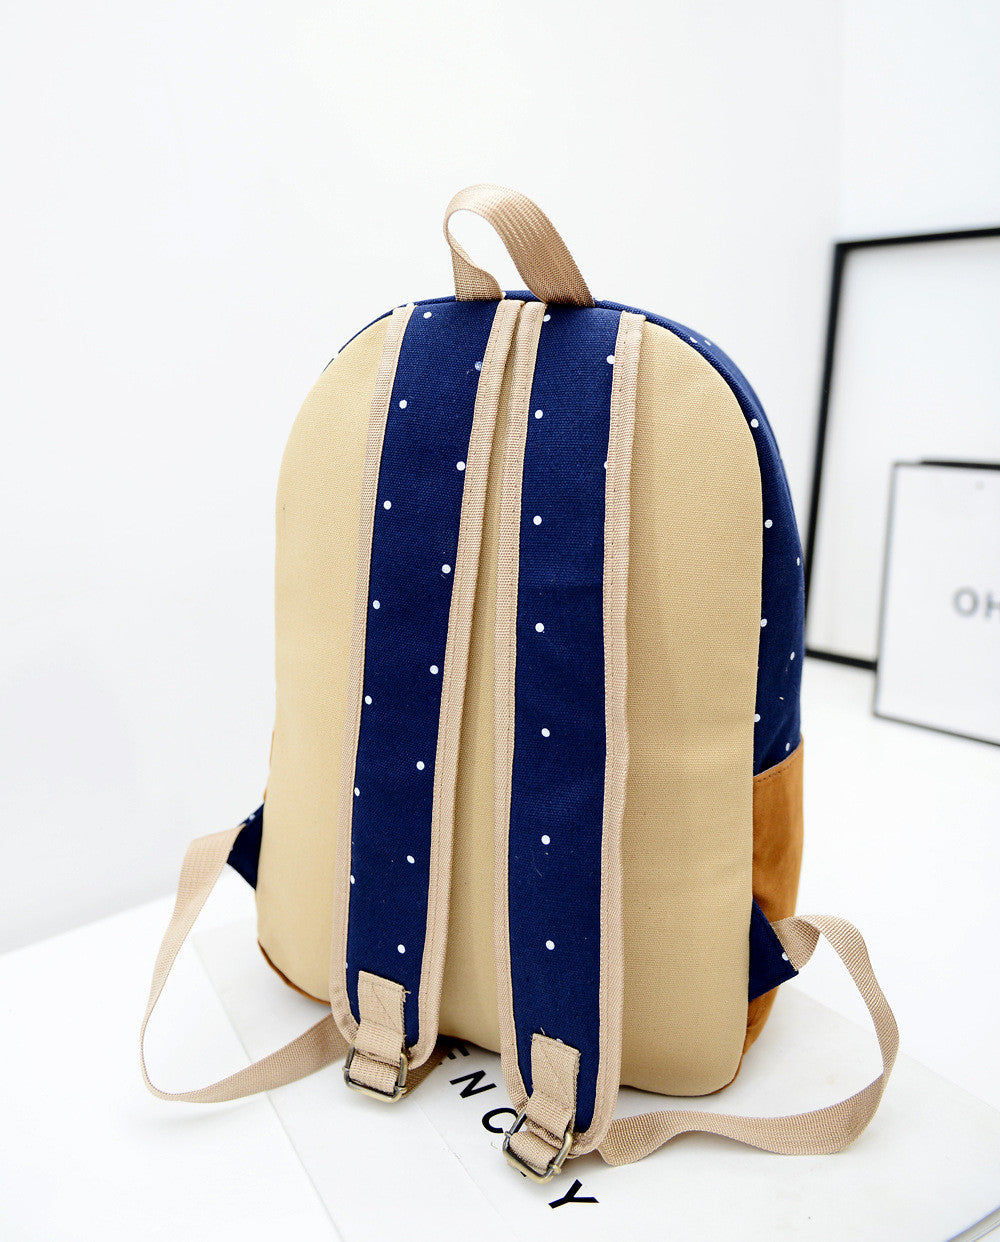 Polka Dot Candy Color Canvas Backpack School Bag - Oh Yours Fashion - 9